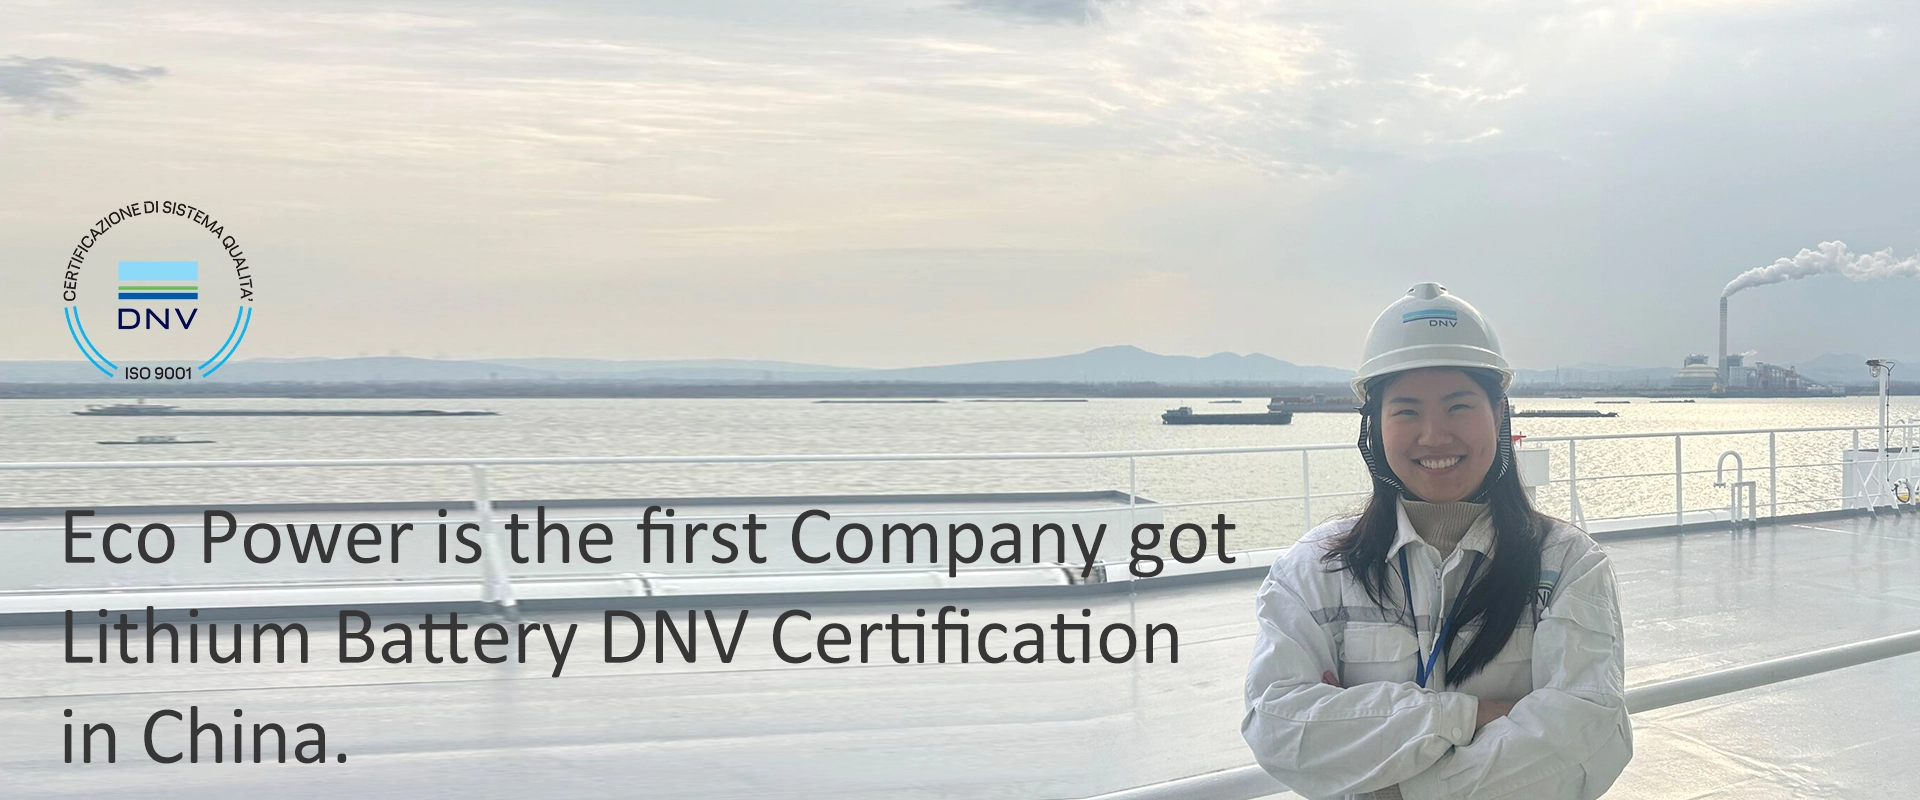 Eco Power is the first Company got Lithium Battery DNV Certification in China.